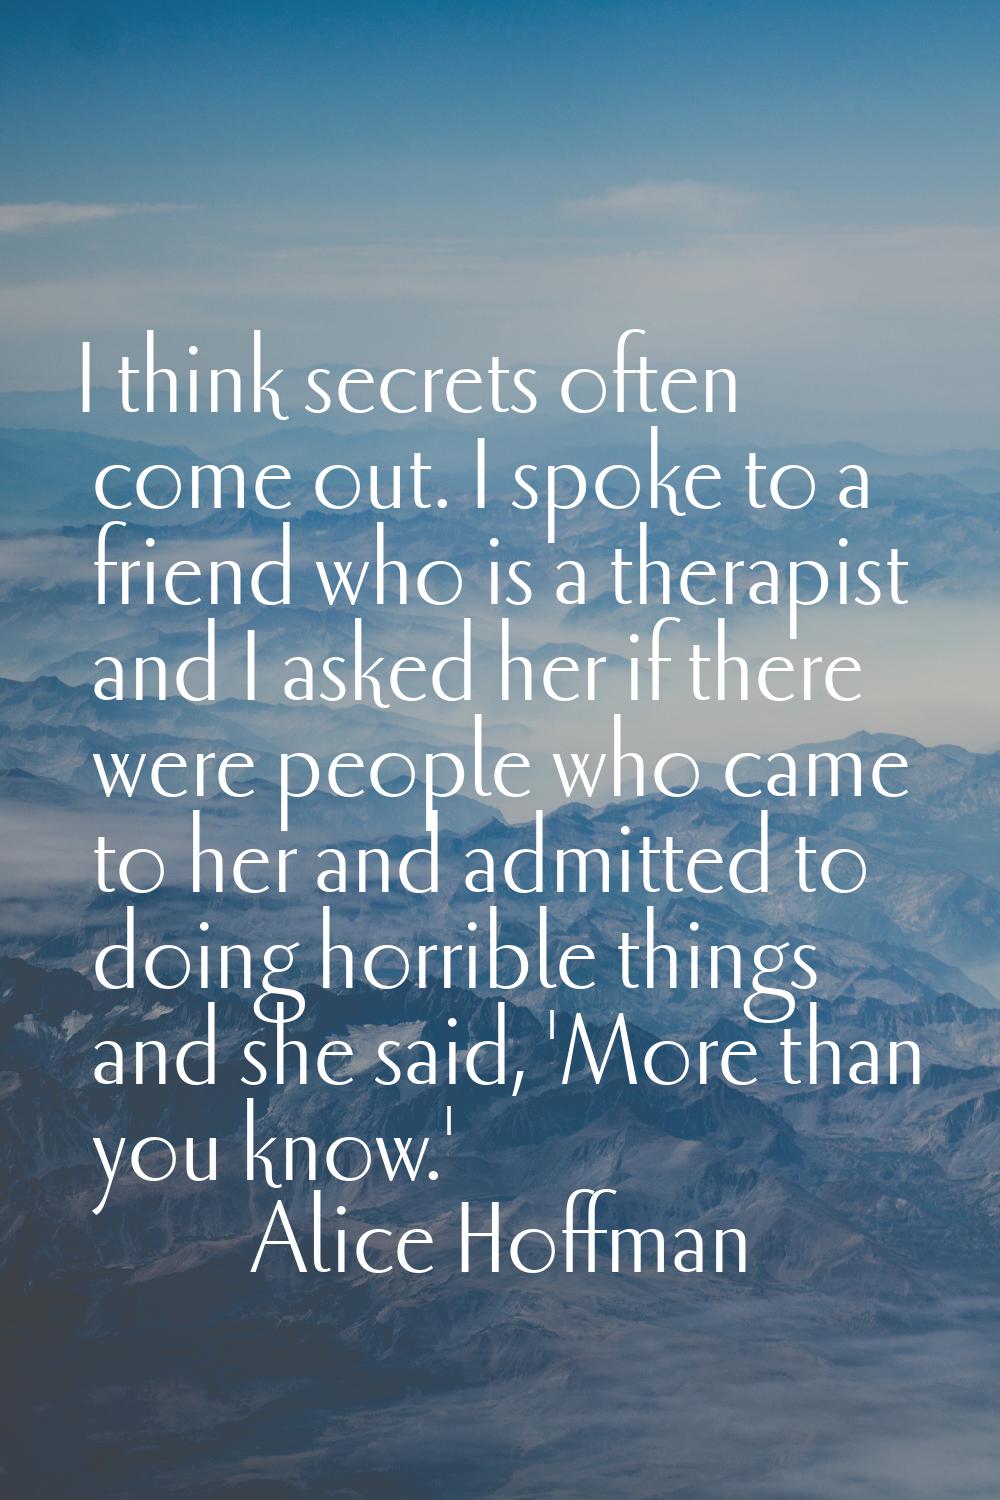 I think secrets often come out. I spoke to a friend who is a therapist and I asked her if there wer